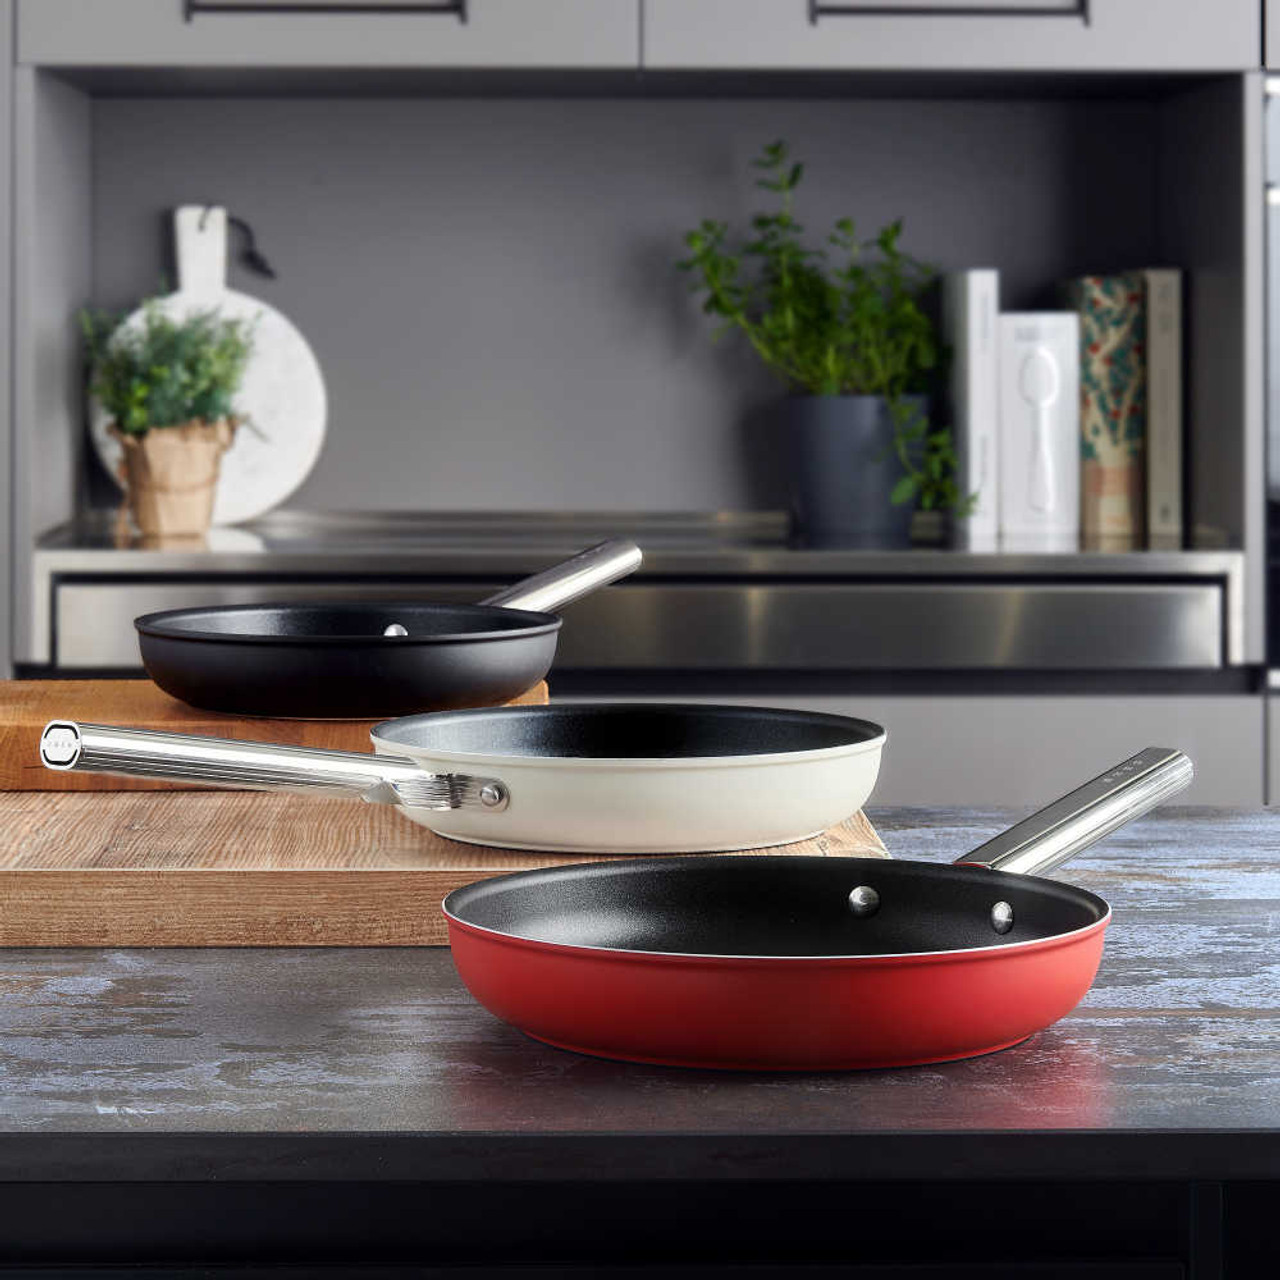 https://cdn11.bigcommerce.com/s-hccytny0od/images/stencil/1280x1280/products/4258/16165/smeg-fry-pan-black-cream-red__38841.1630253268.jpg?c=2?imbypass=on